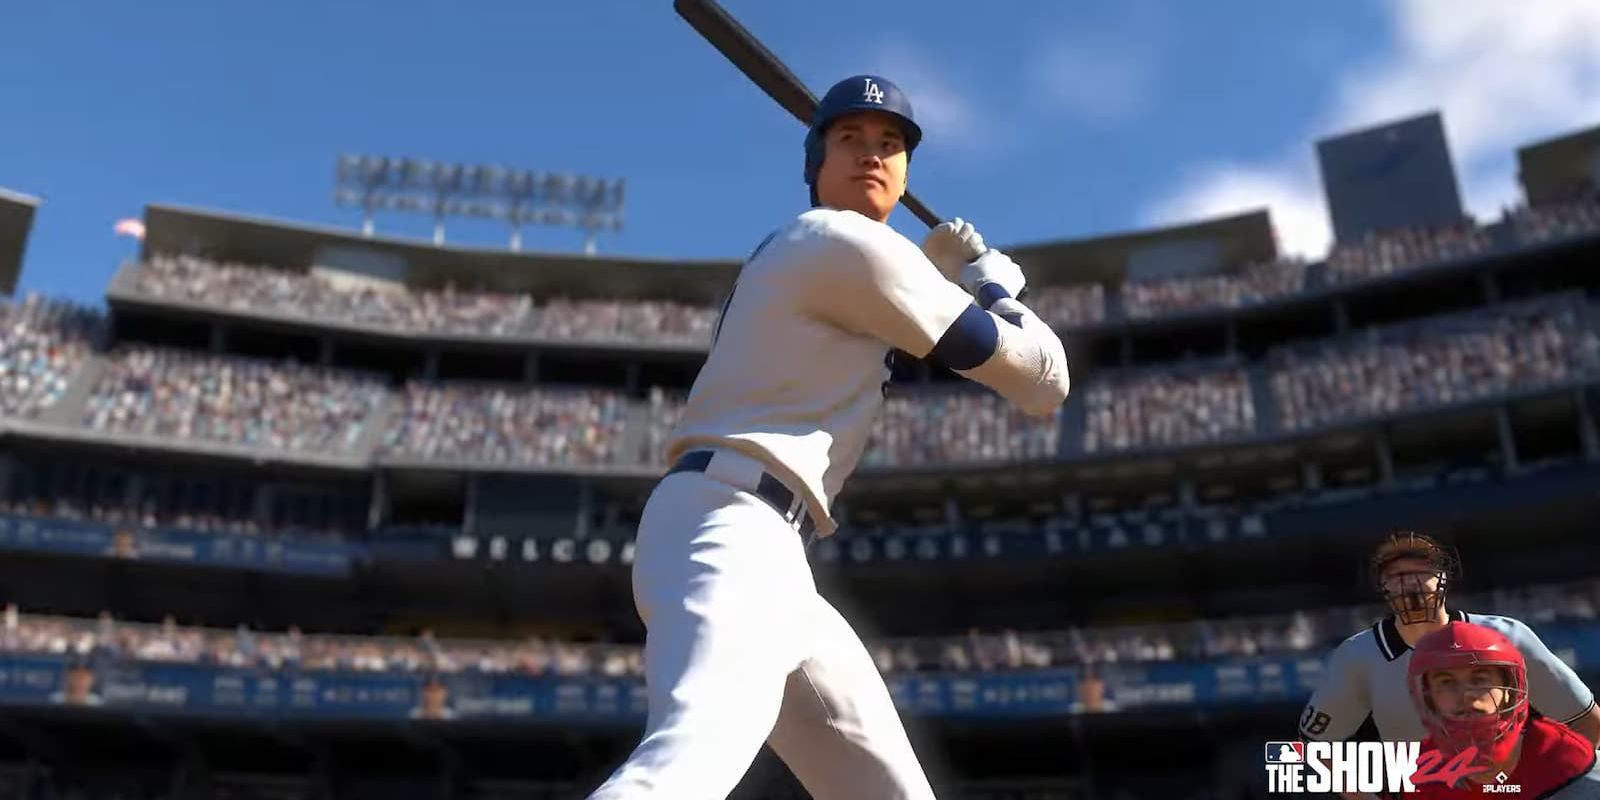 Shohei Ohtani of the Los Angeles Dodgers awaits the pitch in MLB 24 The Show